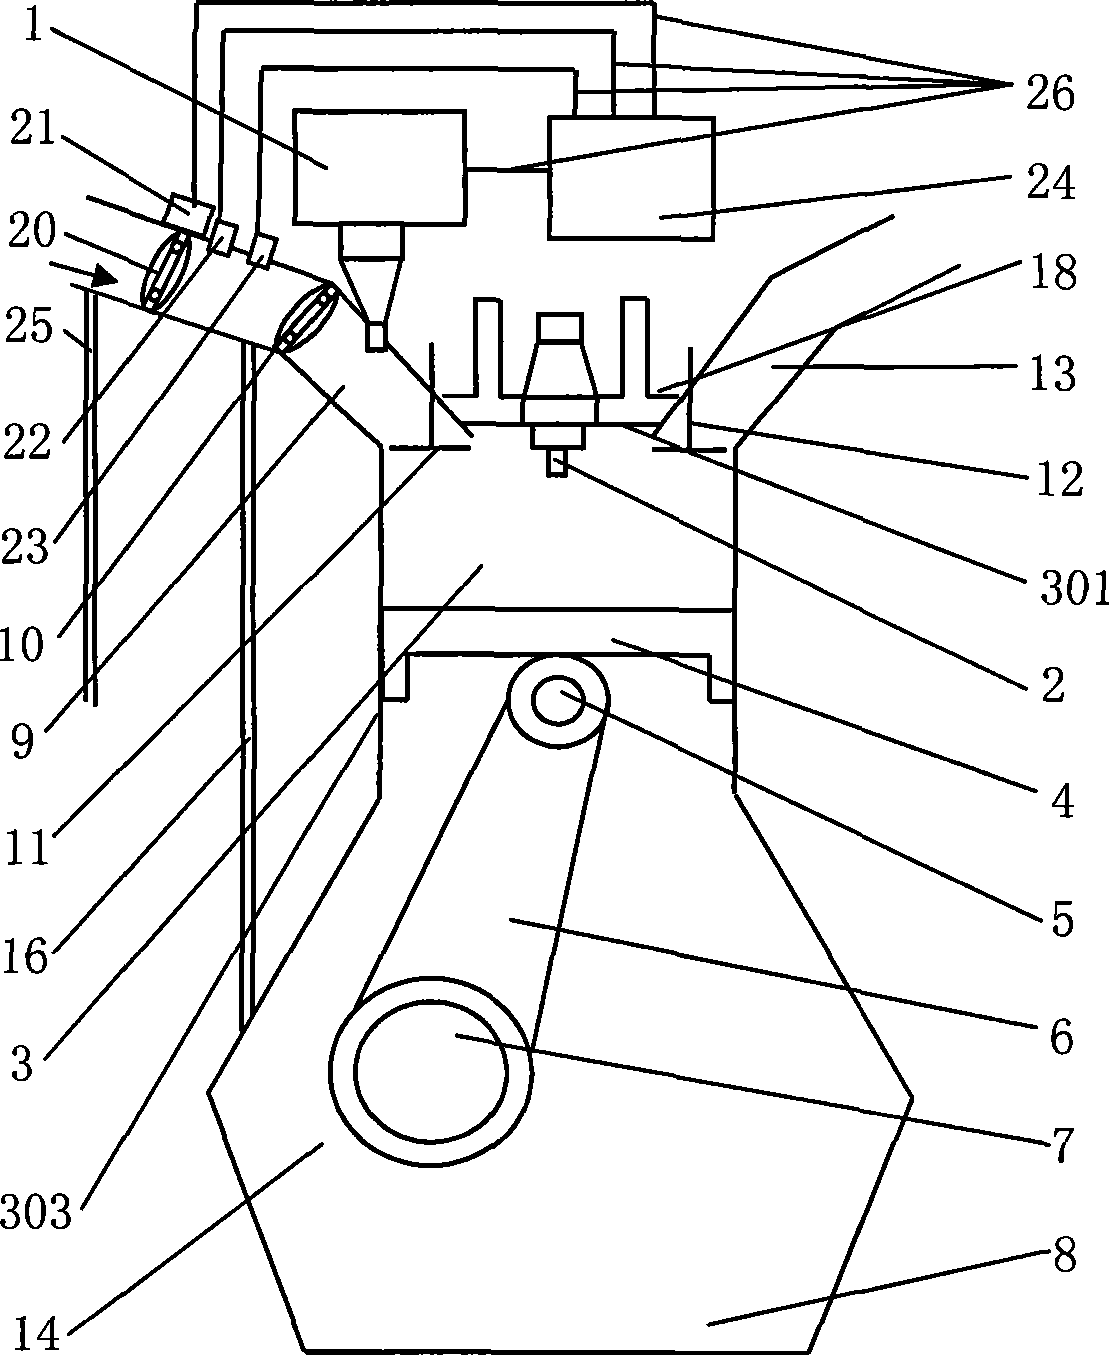 Pressure reducing air inlet high compression ratio internal-combustion engines